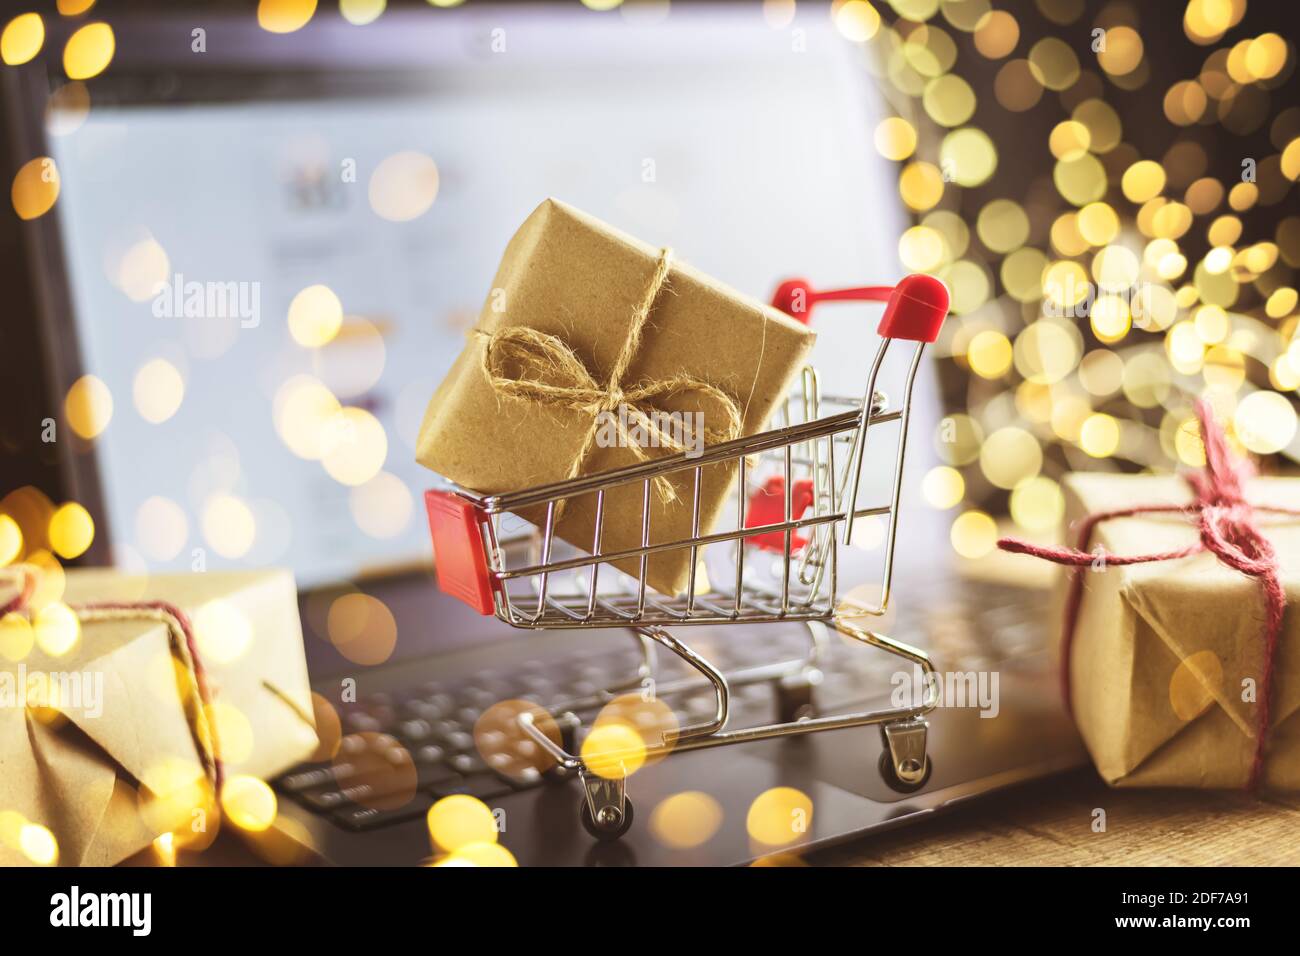 the concept of online shopping. christmas, new year, laptop, trolley with gift, lights Stock Photo